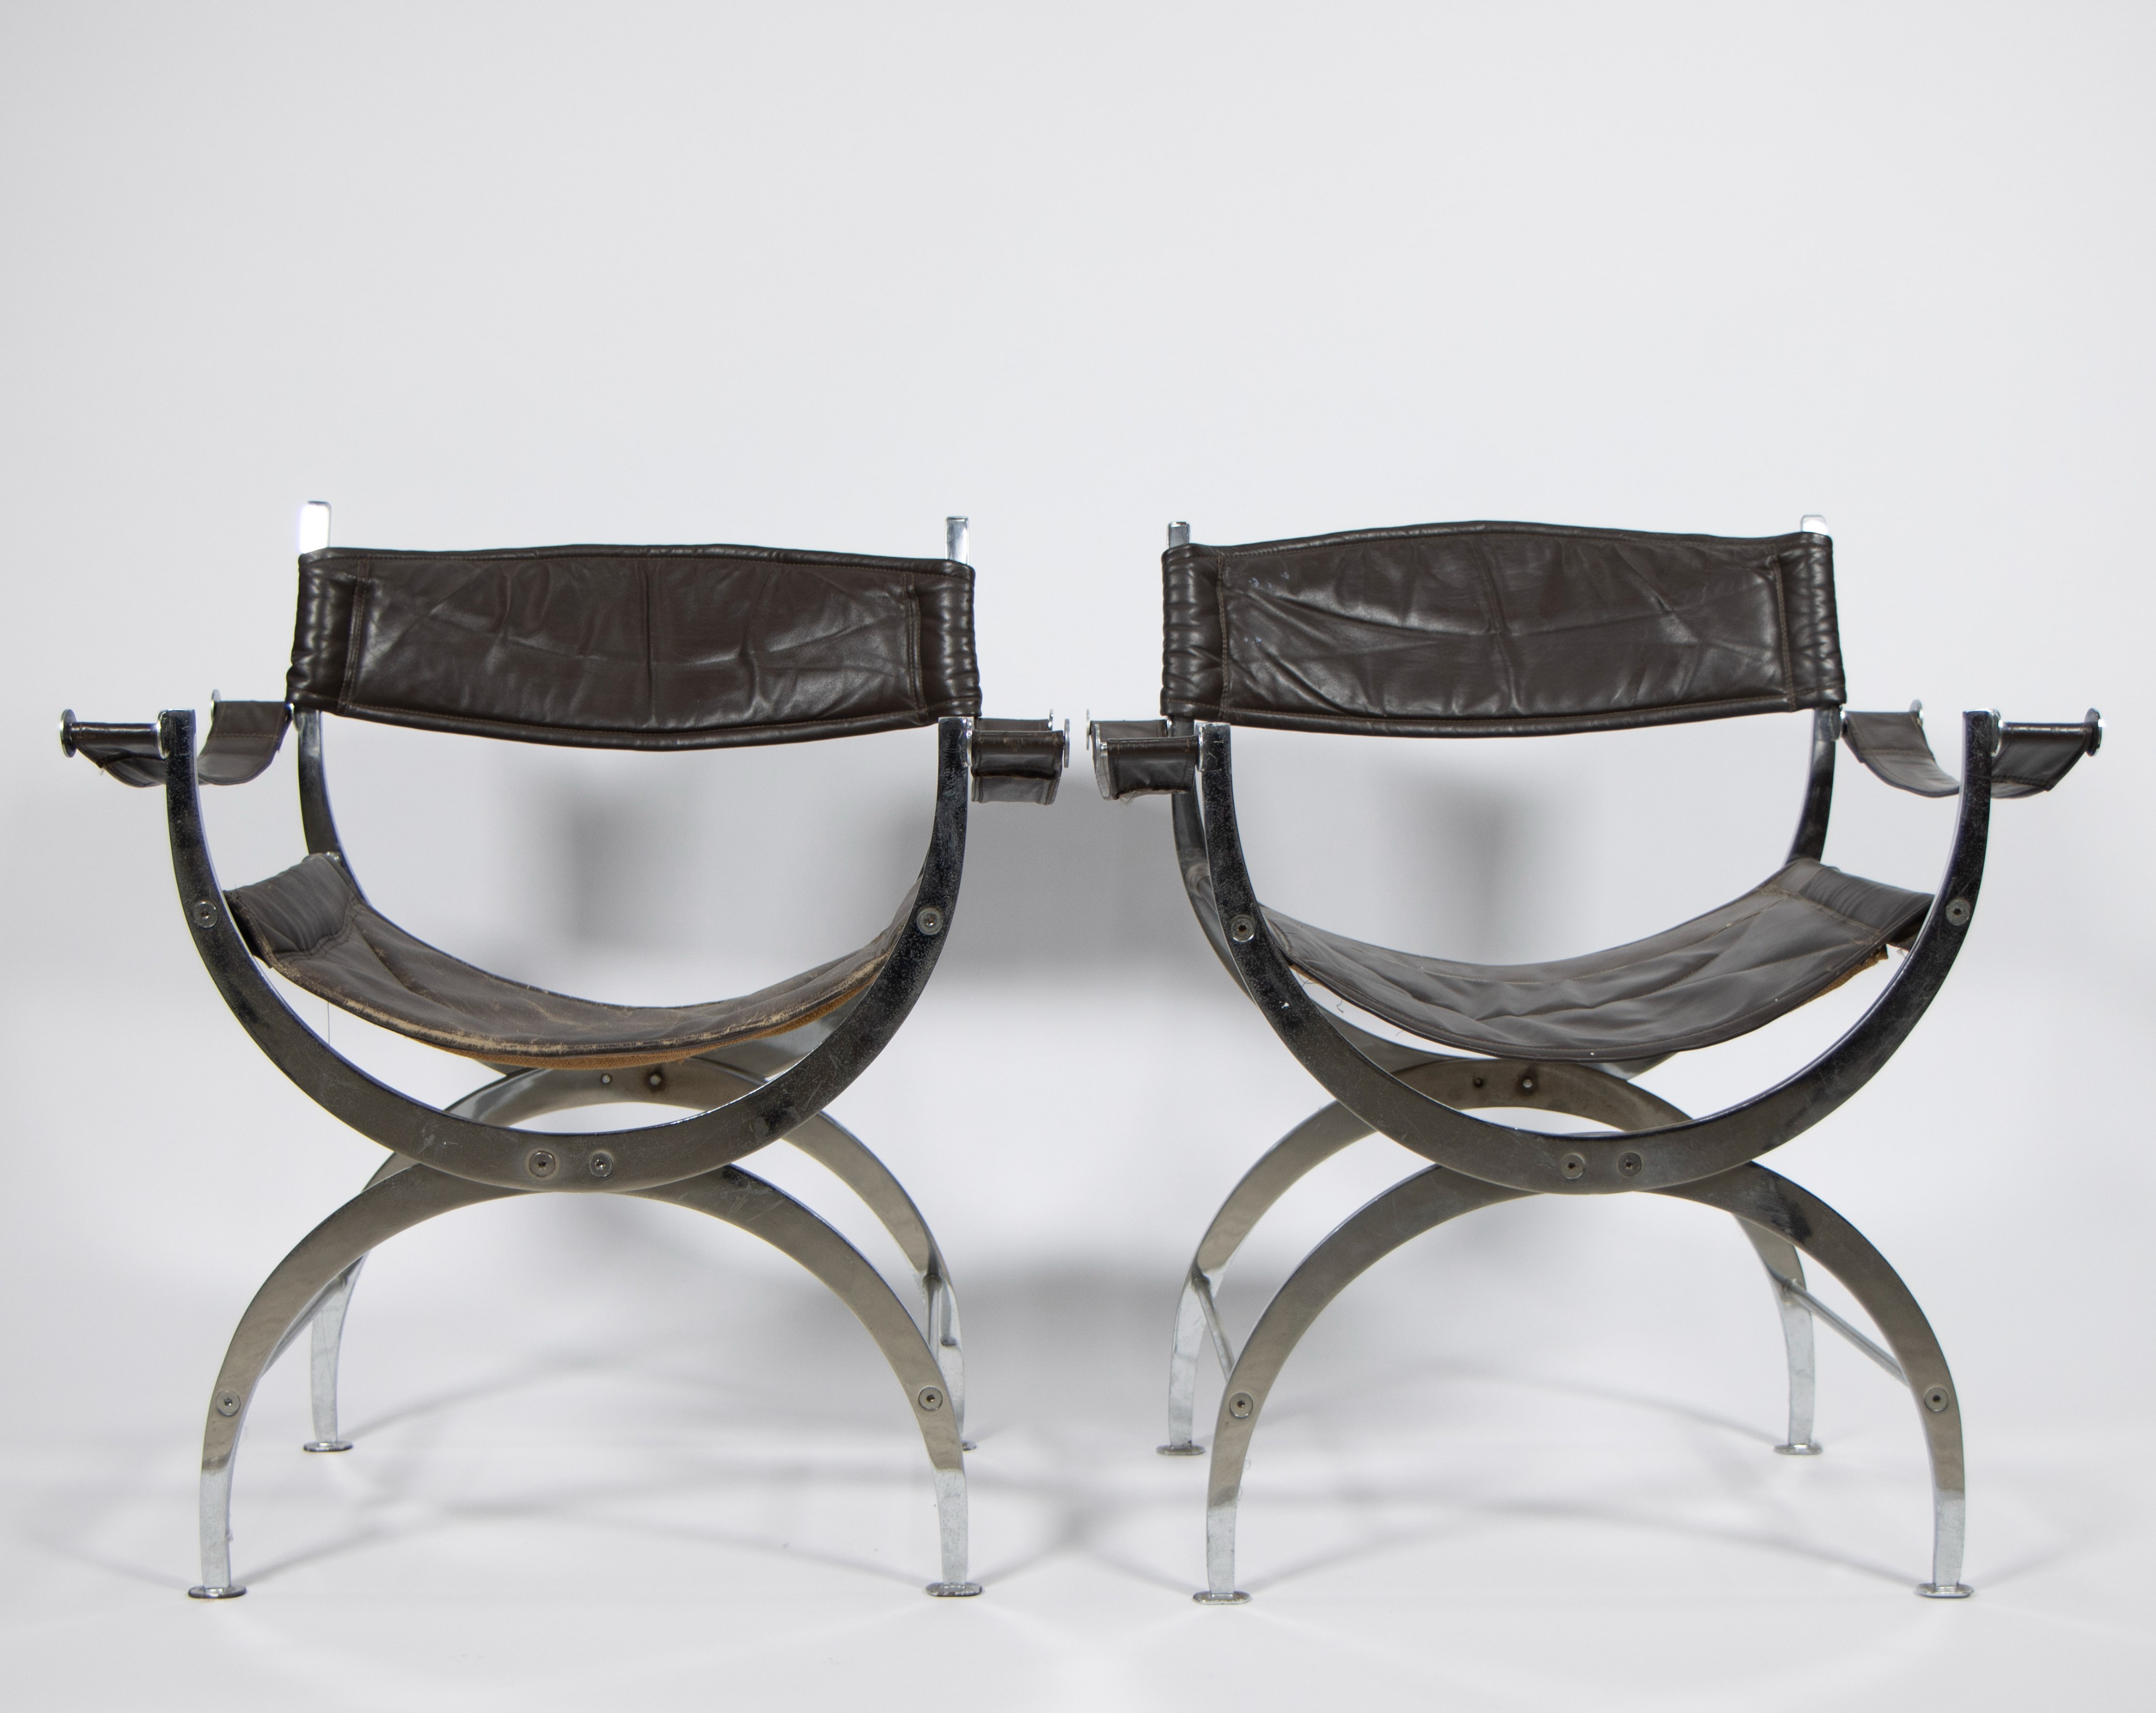 Pair of vintage leather and chromed metal curules chair 1970s - Image 2 of 3